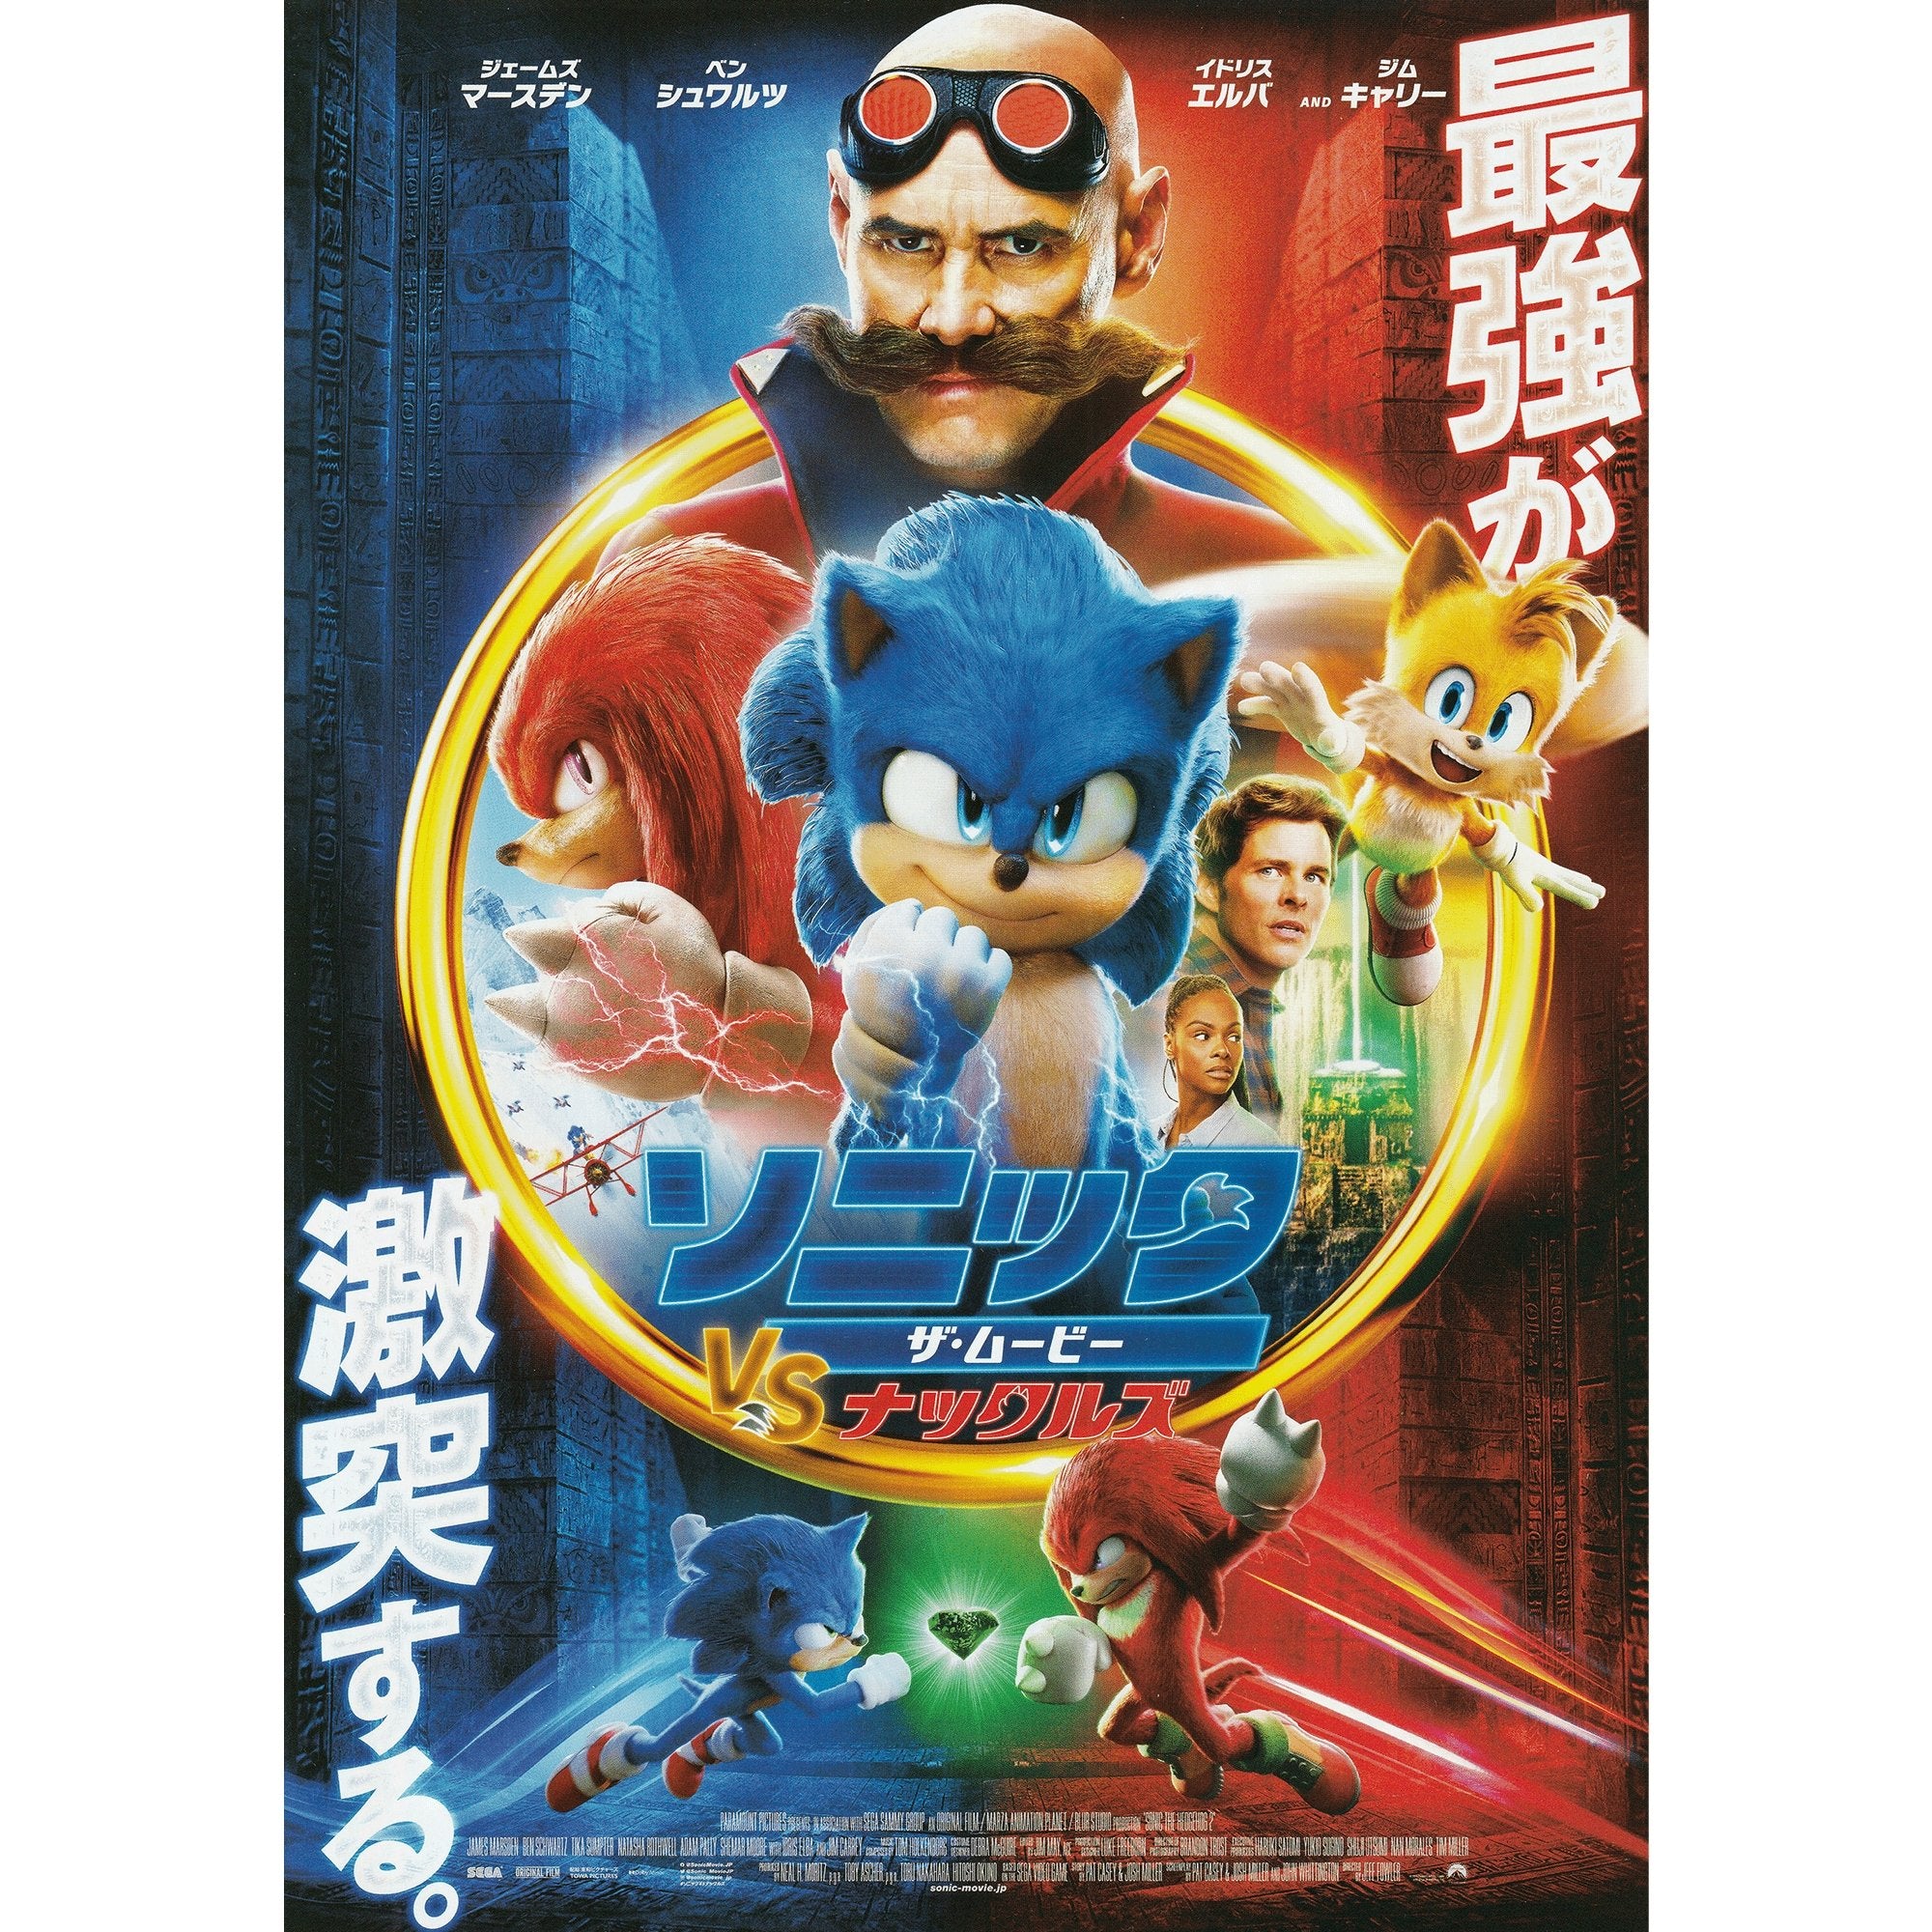 Sonic the Hedgehog 3 Movie posters for sale